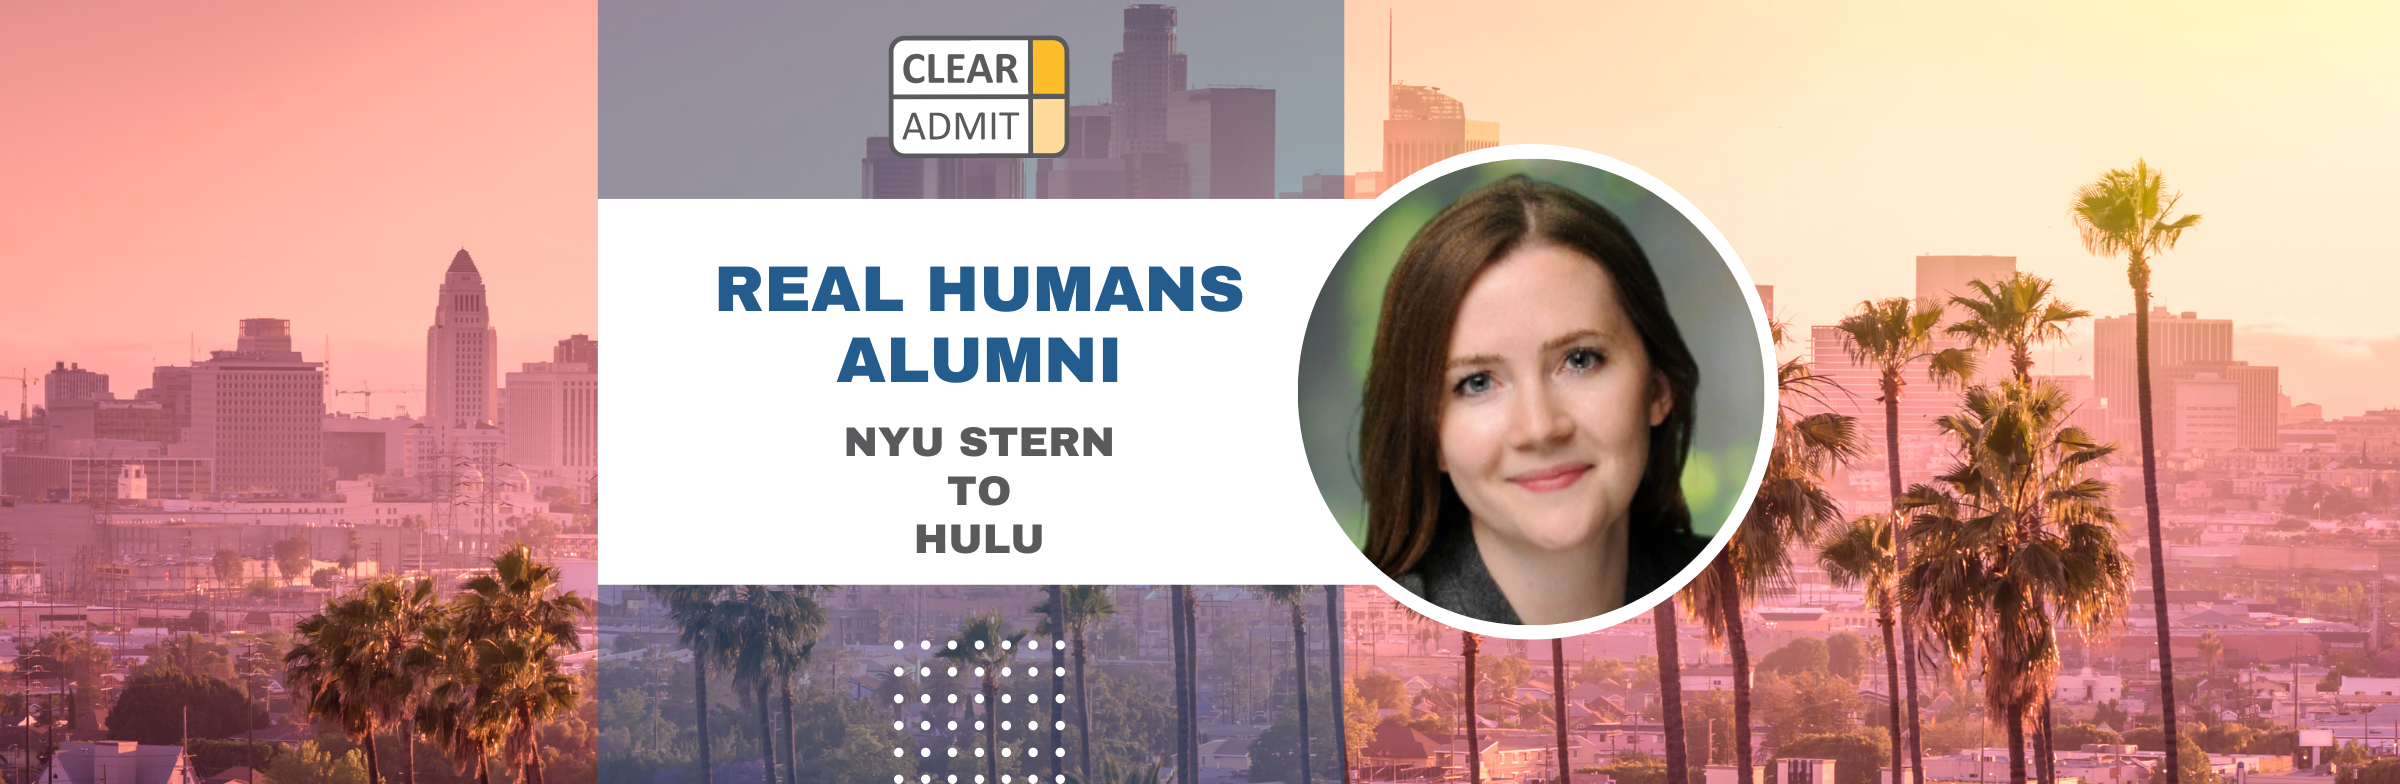 Image for Real Humans of Hulu: Jess Keane, NYU Stern MBA ’22, Senior Content Acquisition Associate